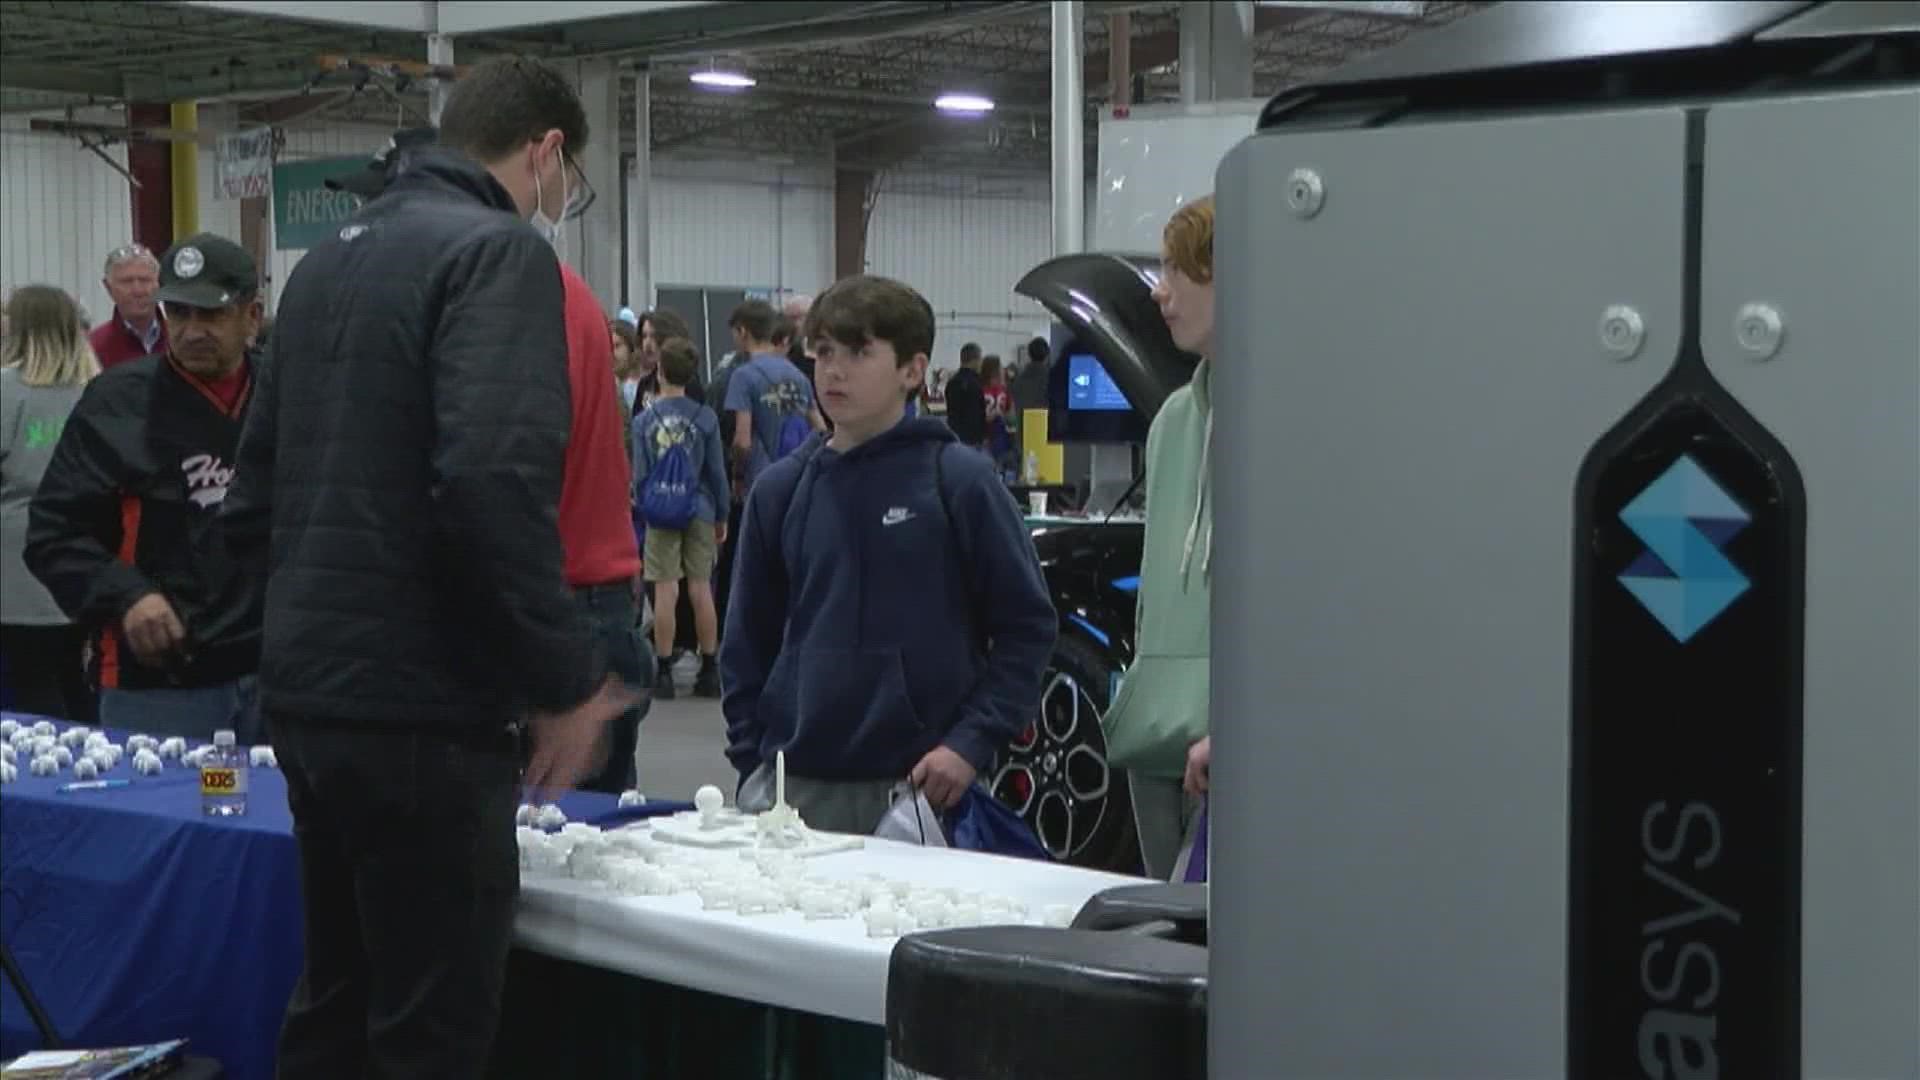 Hundreds of middle schoolers were offered career options, including those with an electric truck & battery plant that will be open once they graduate high school.